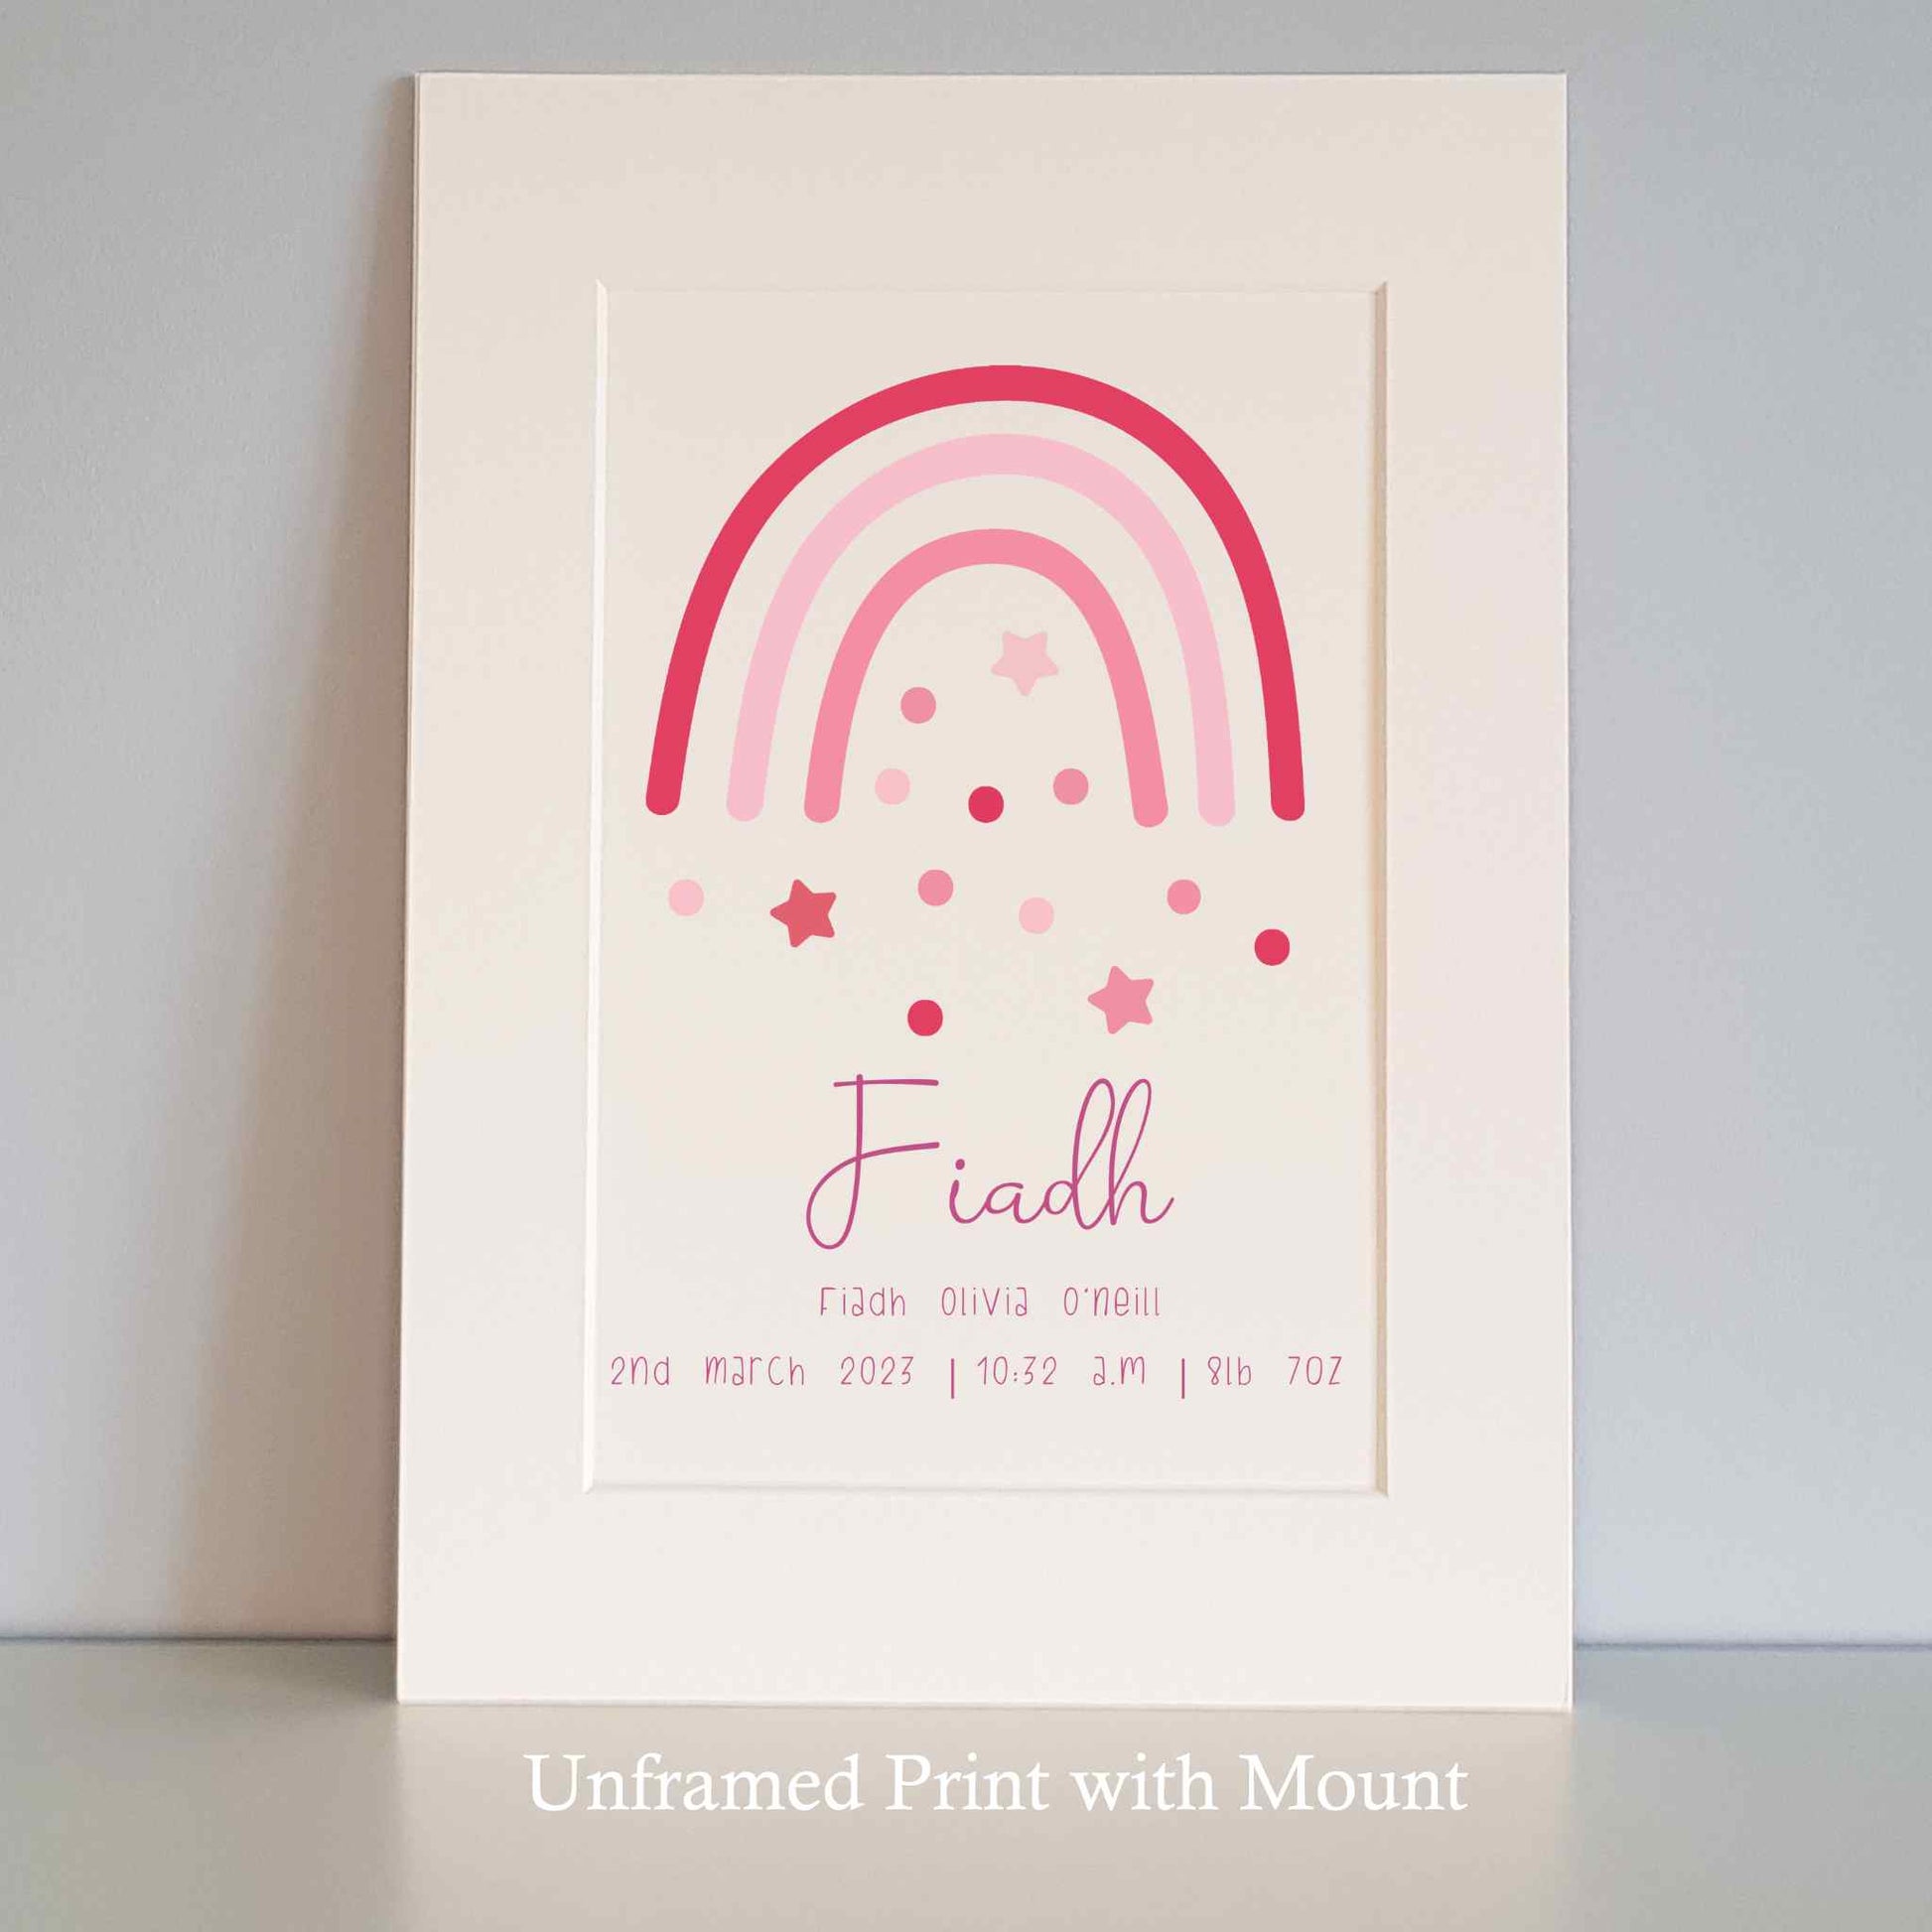 Personalised Unframed Print with Pink Boho Rainbow, baby’s name, and birth details. White mount surround.